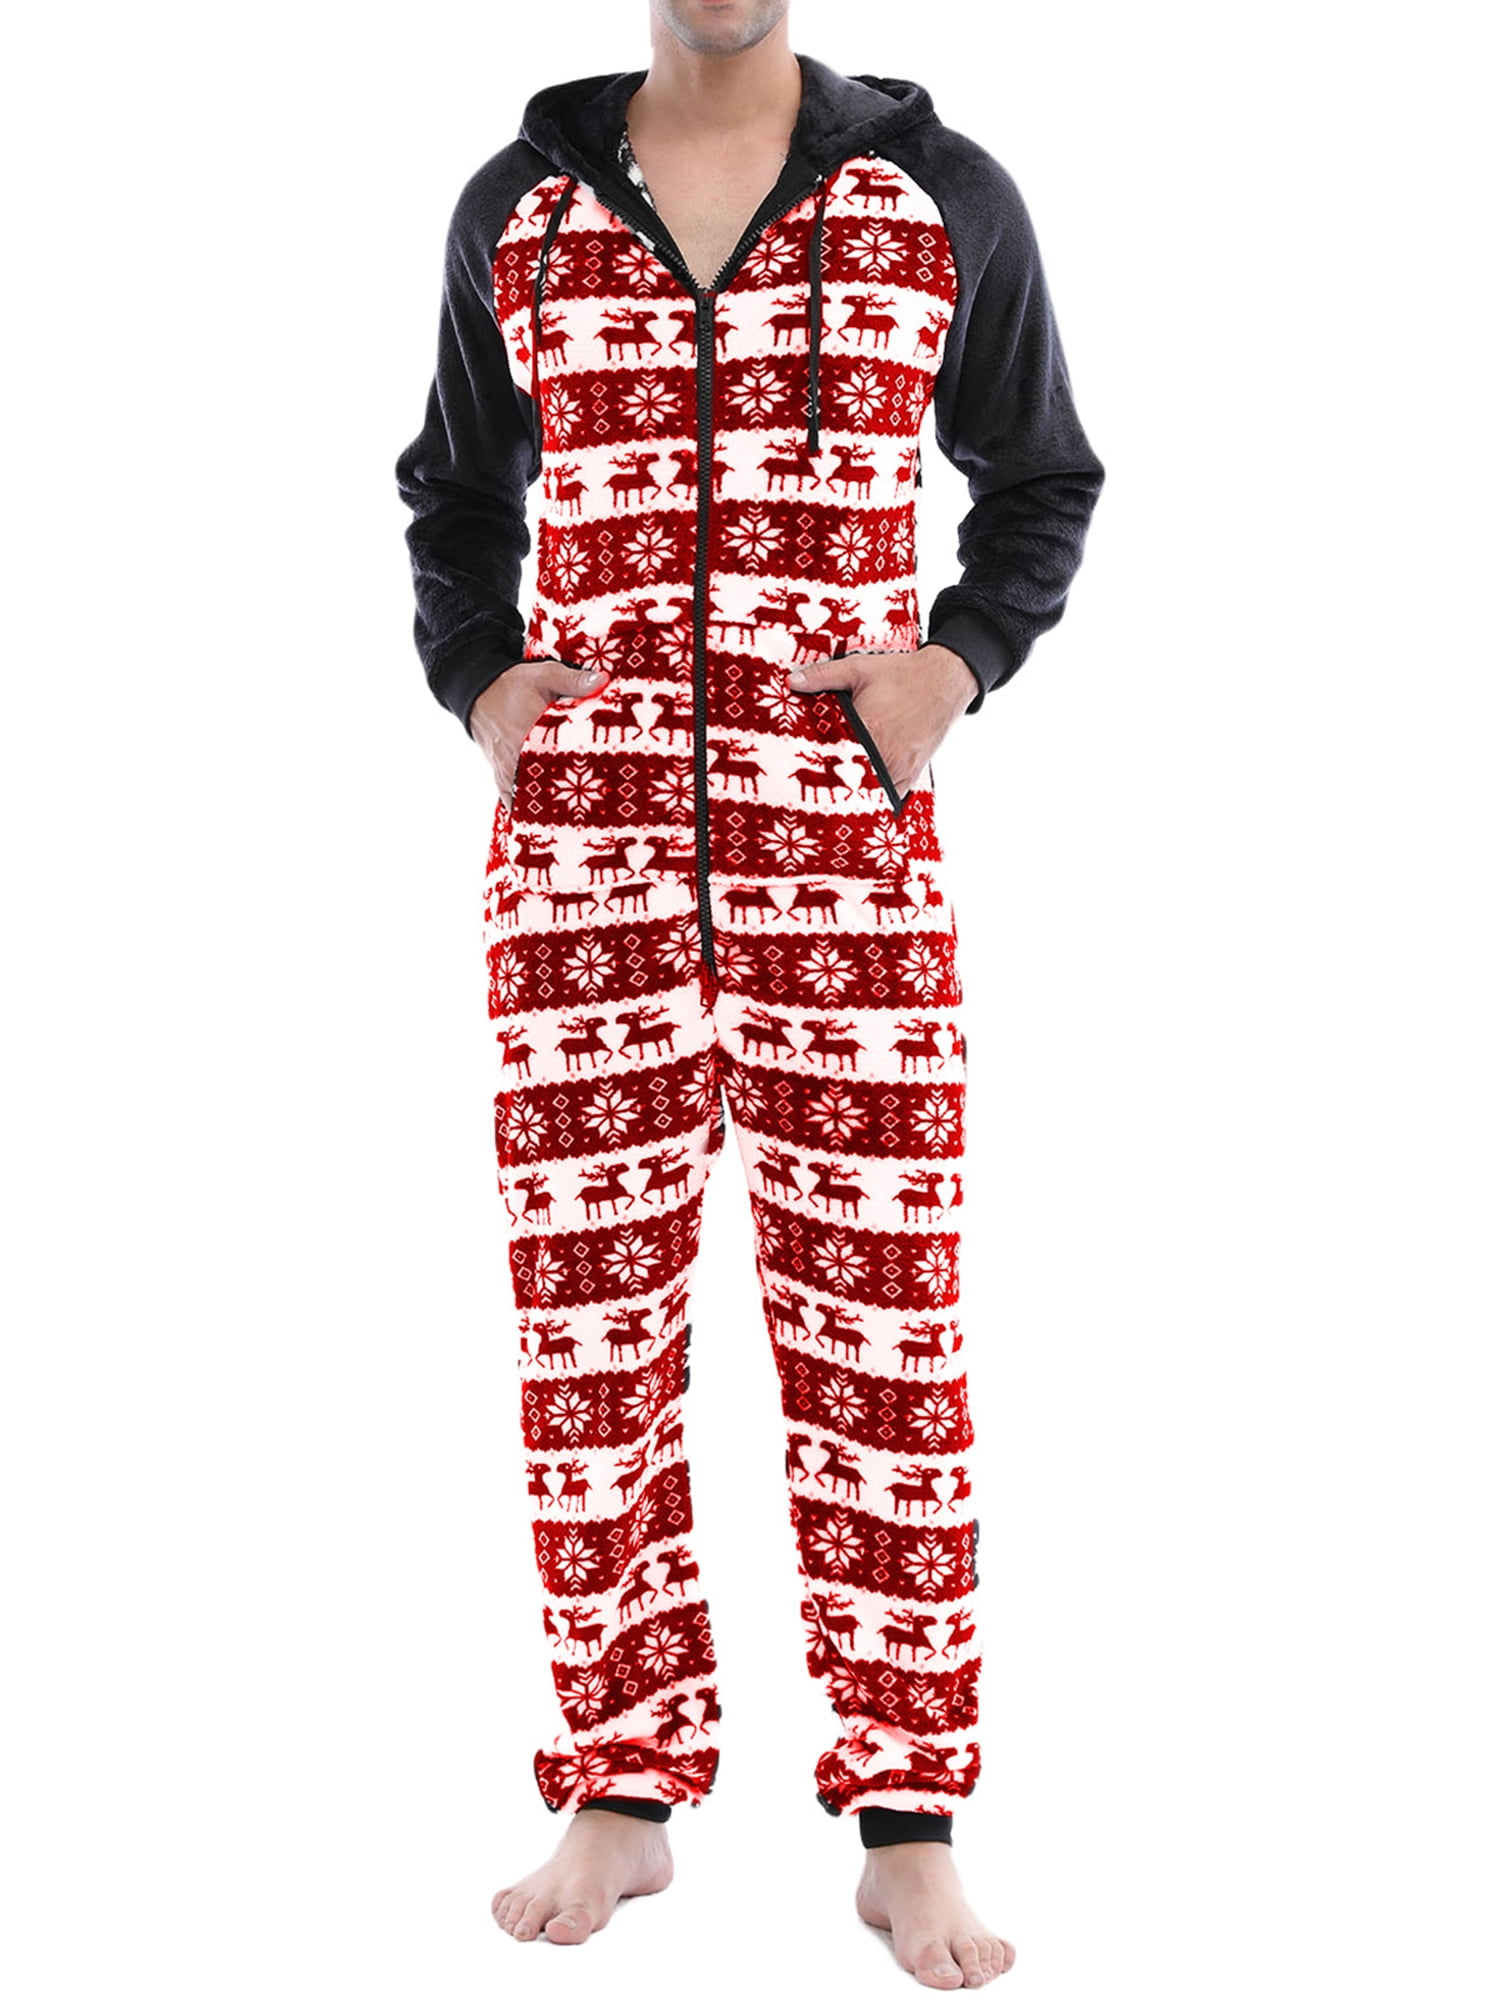 Mens Printed Onesie Hooded Jumpsuit All in One Piece Pyjamas Comfy with Insignia Lounge Socks 